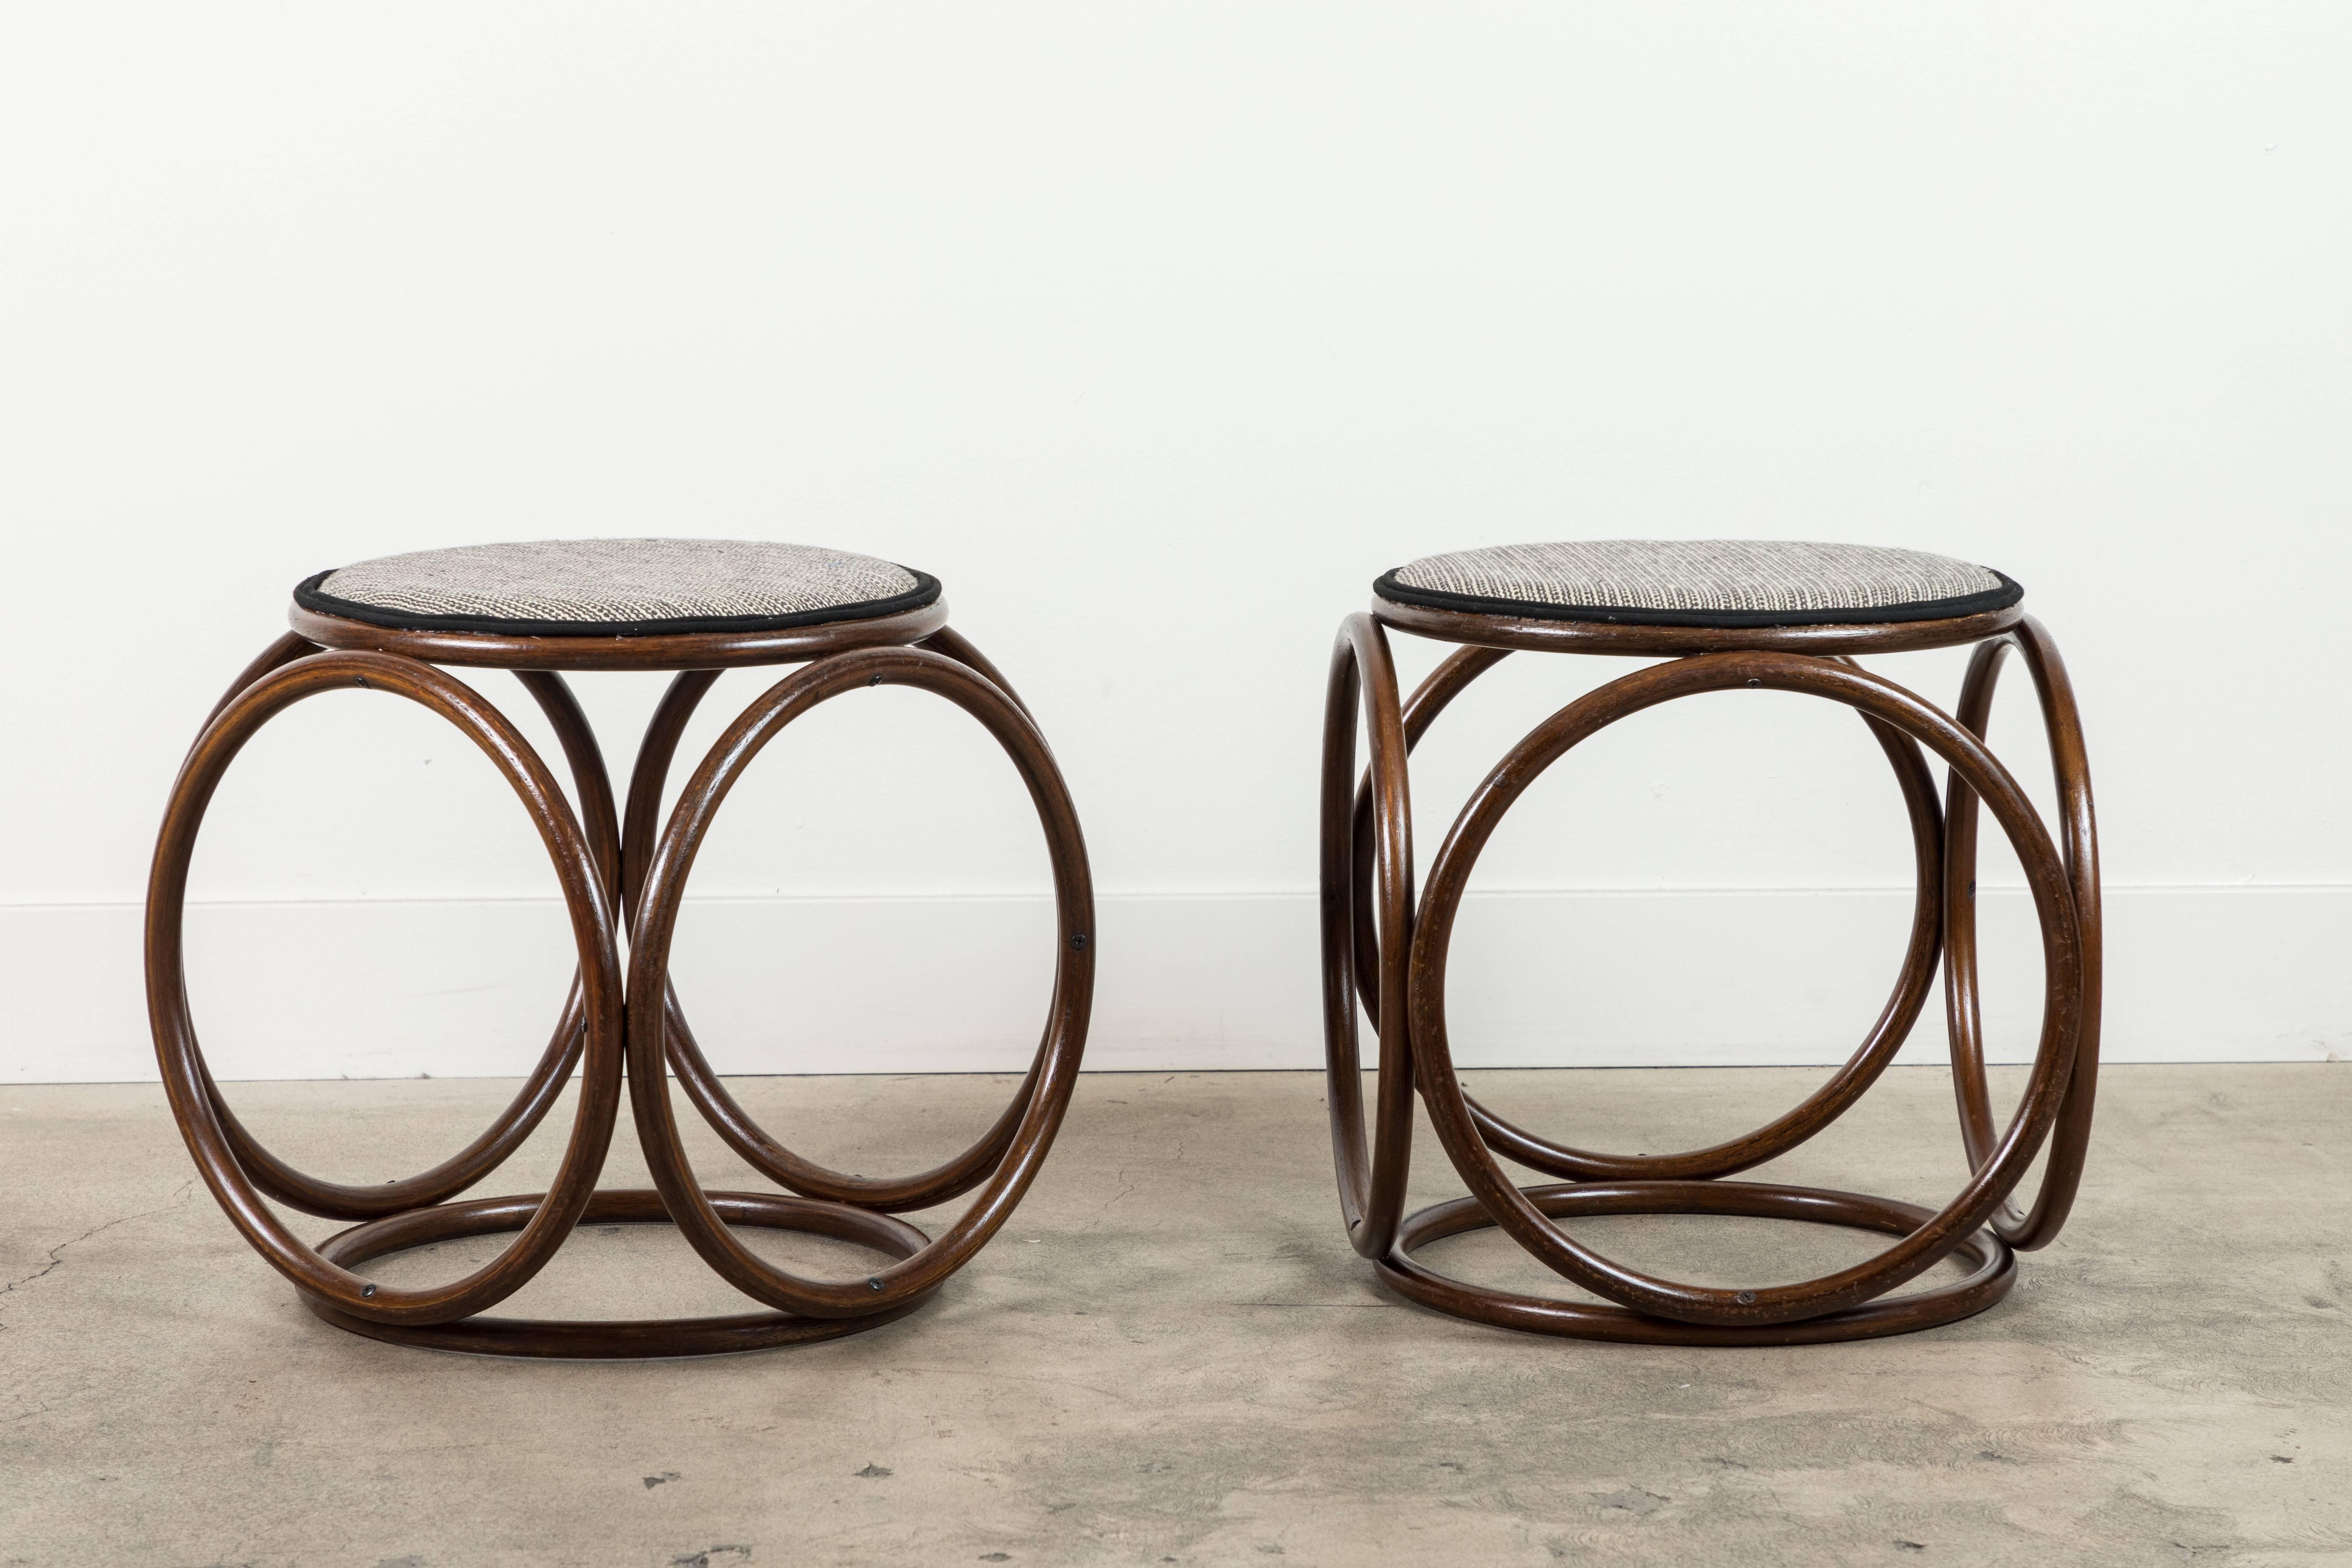 Pair of Thonet style stools.